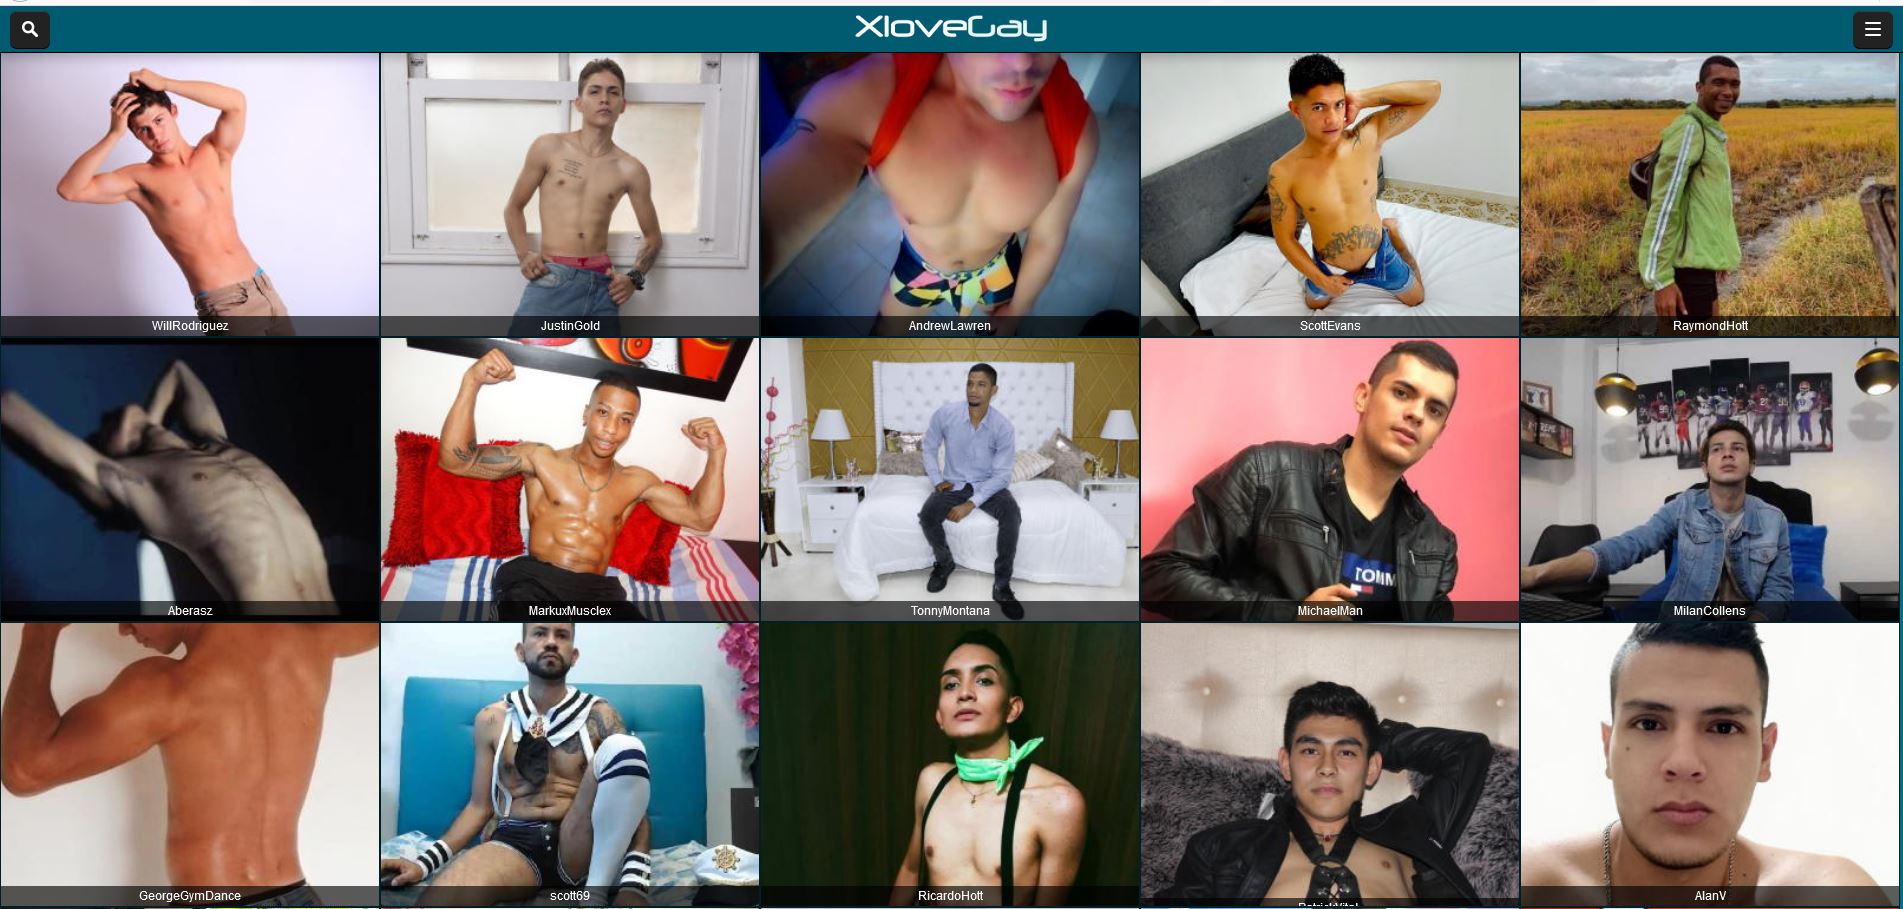 XloveGay.com a great place to find gay guys naked on cam